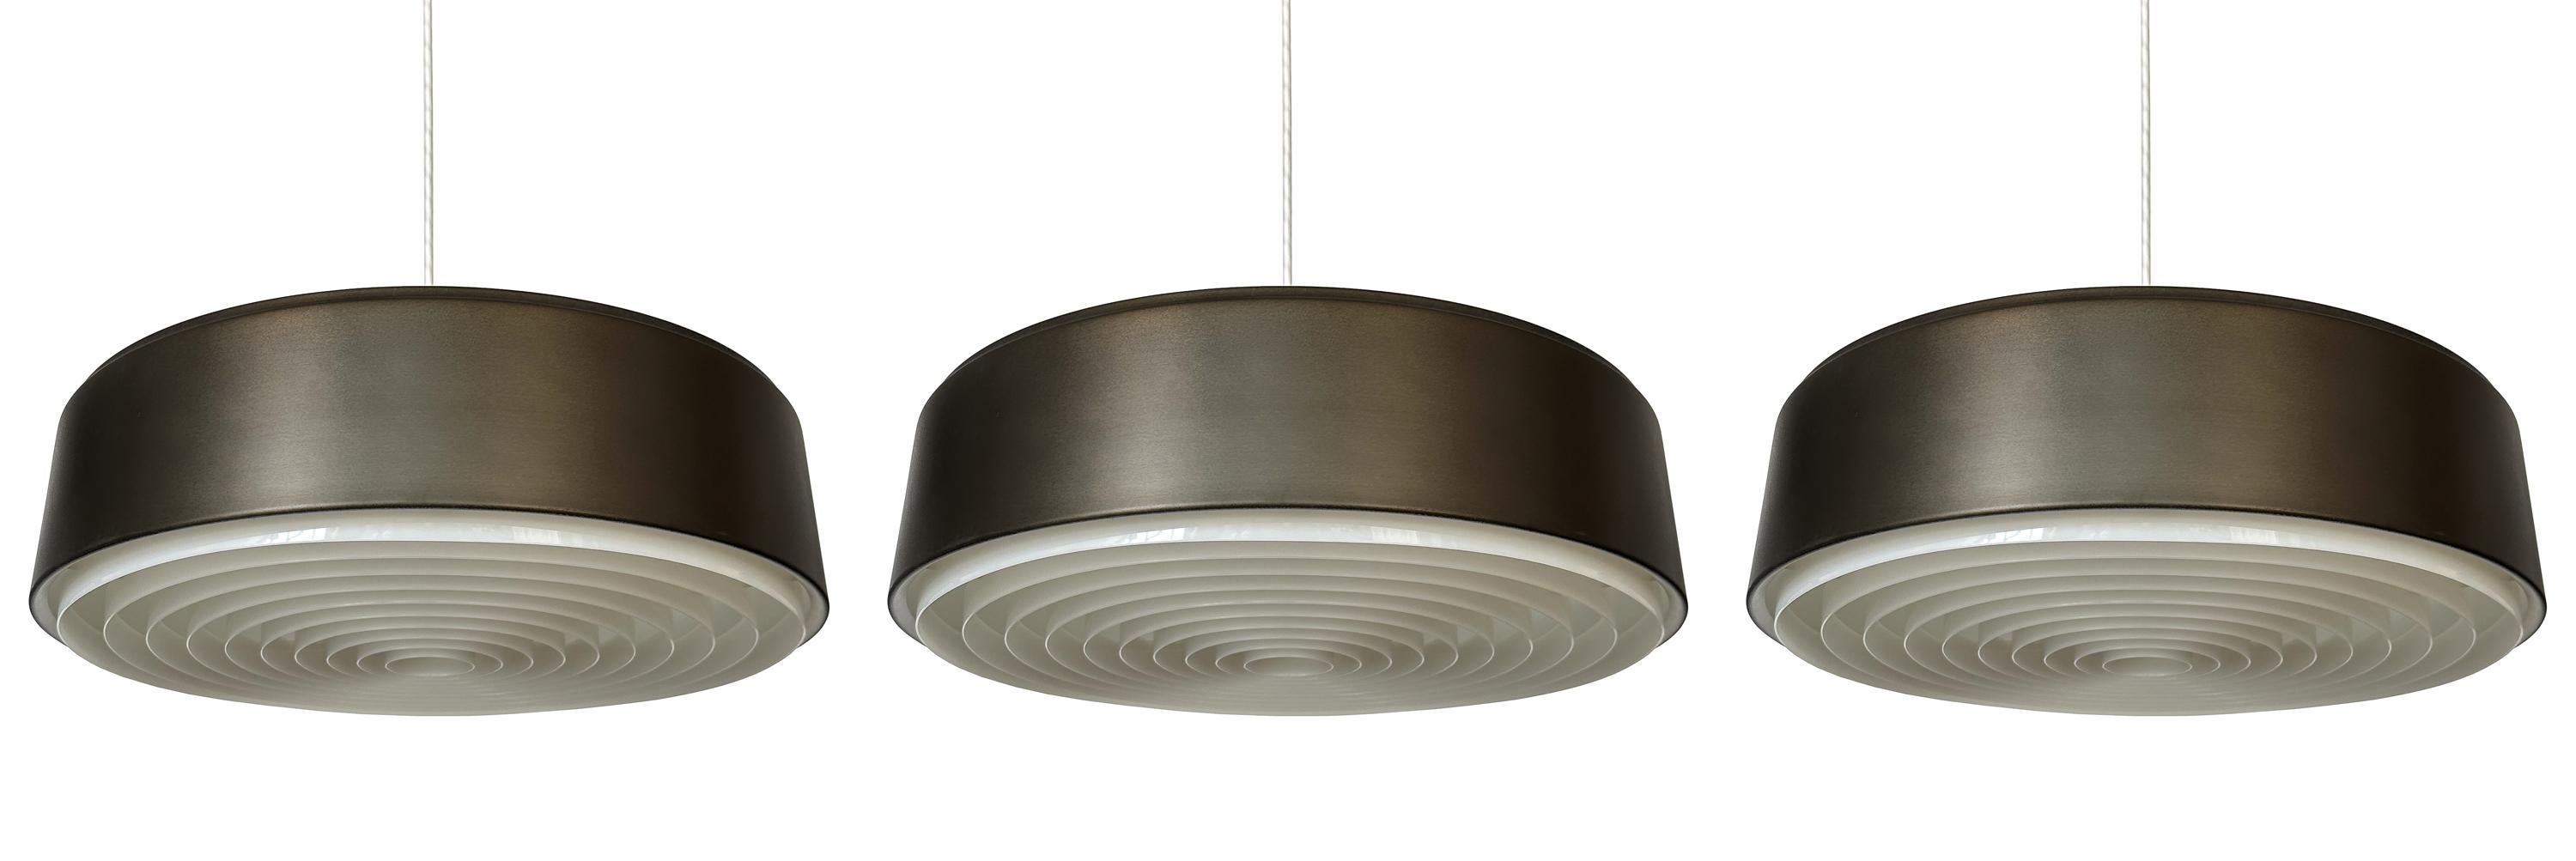 Elevate your interiors with the subtle sophistication of Sven Middelboe's pendant lamp for Nordisk Solar, a rare gem from Denmark's golden age of design, circa 1960s. Model 74212, with its durandoic bronze (brown black)  finish over spun aluminum,